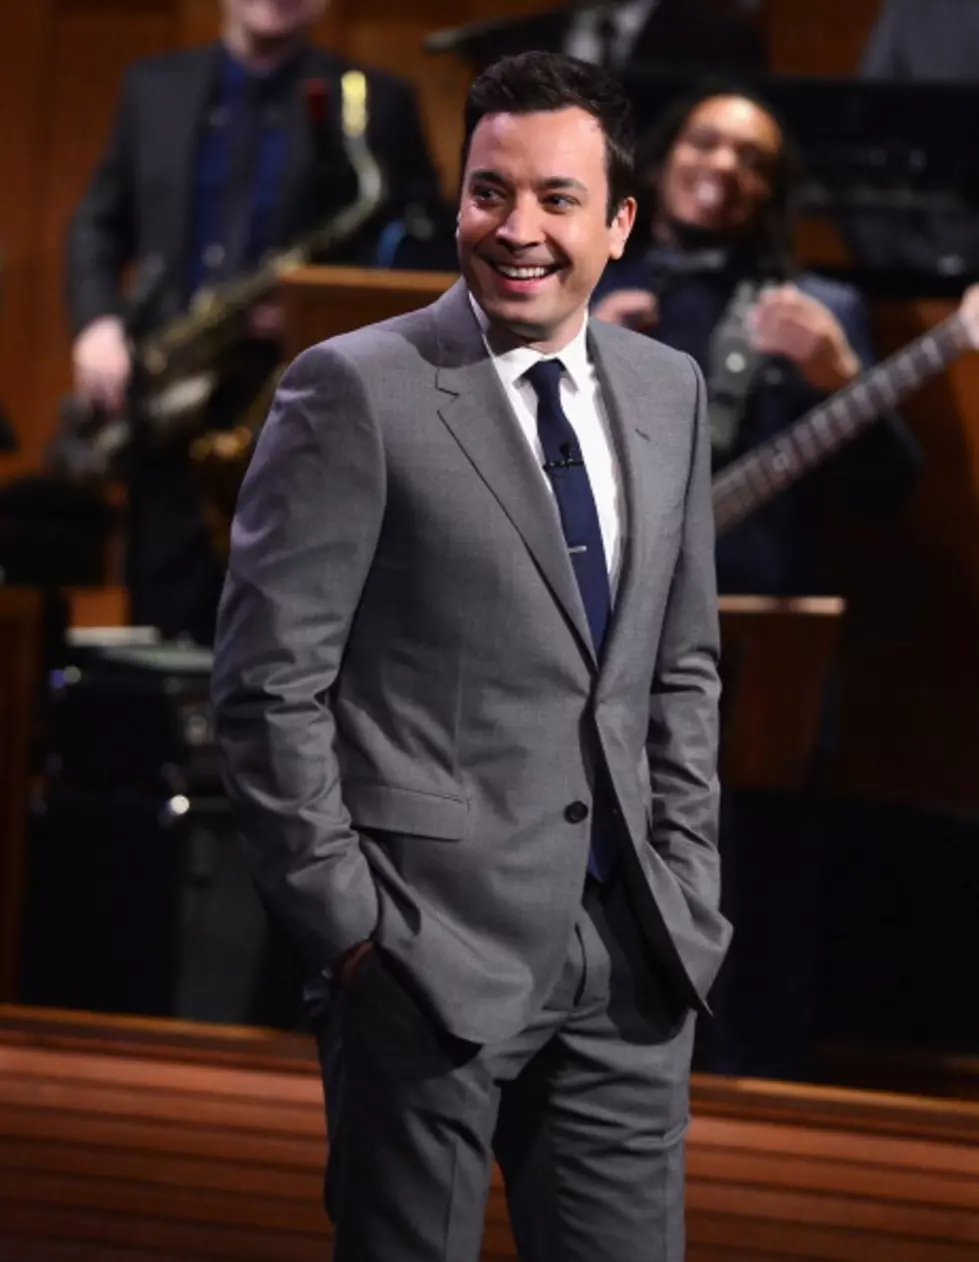 Jimmy Fallon With Gov. Chris Christie – Evolution of Dad Dancing [Watch]